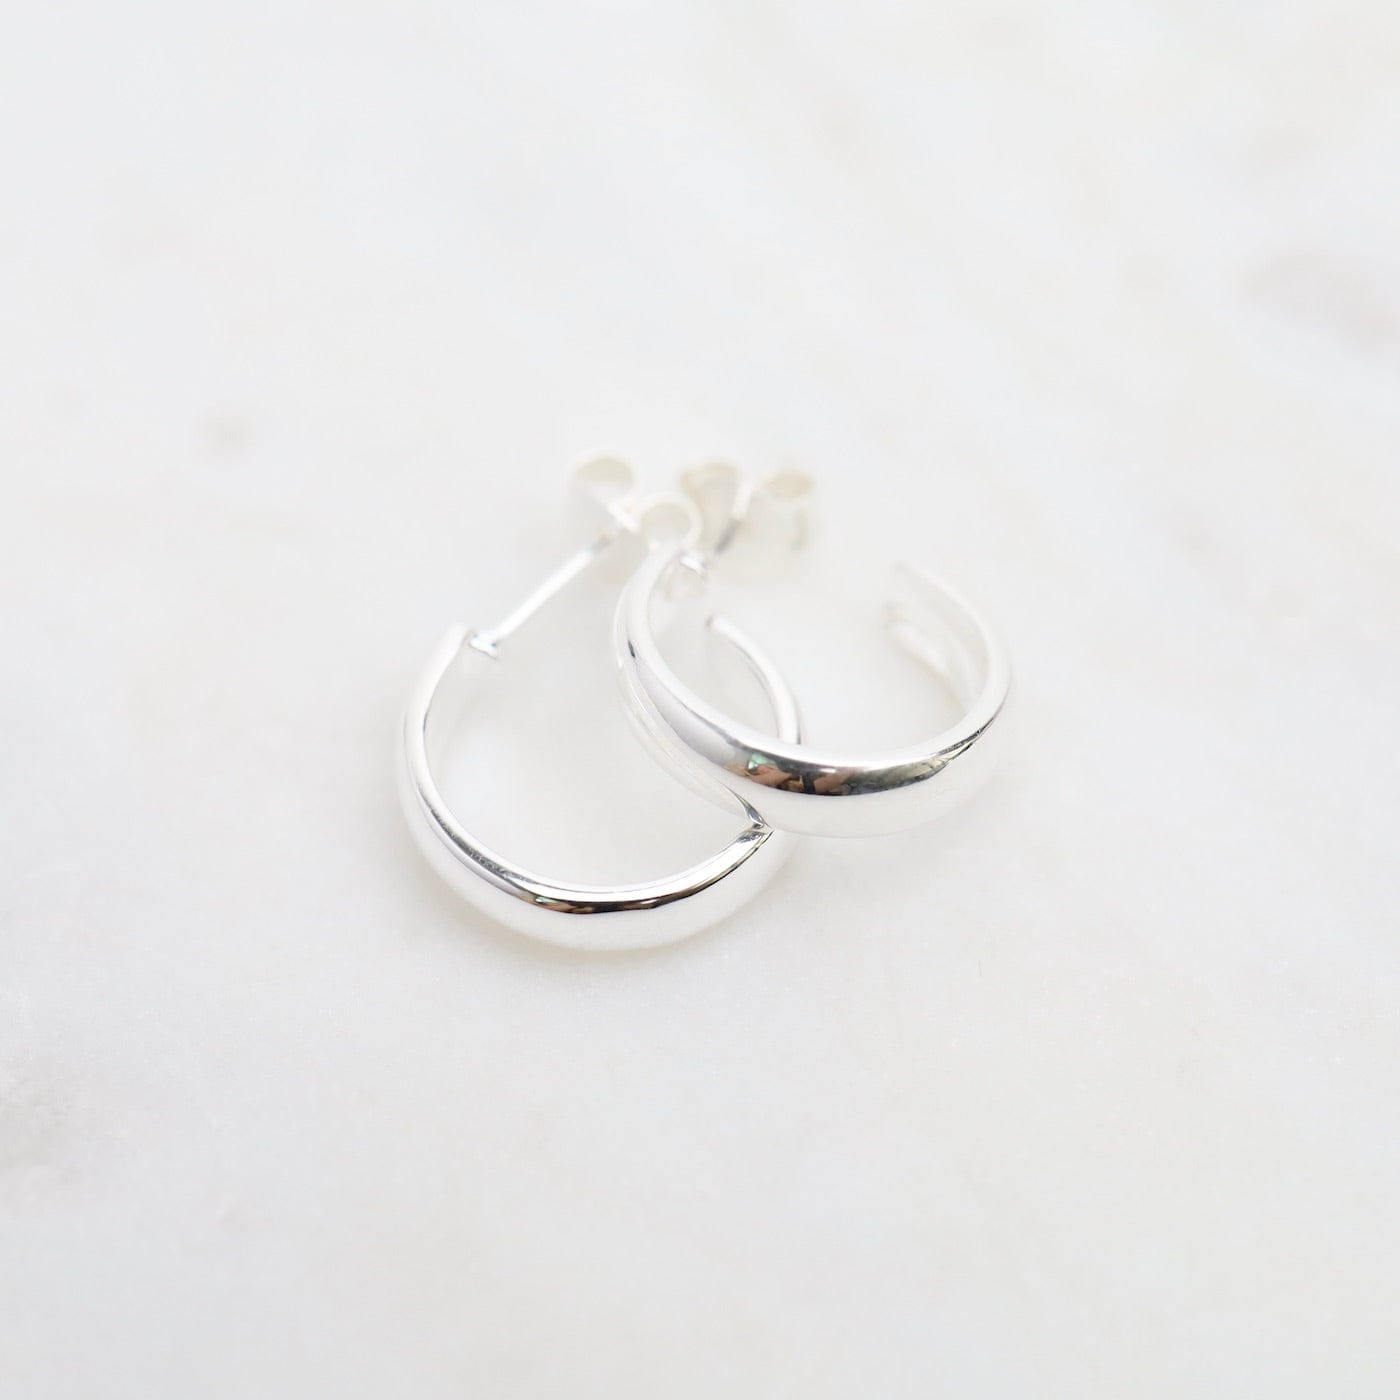 EAR Small Hoops on Post - Sterling Silver